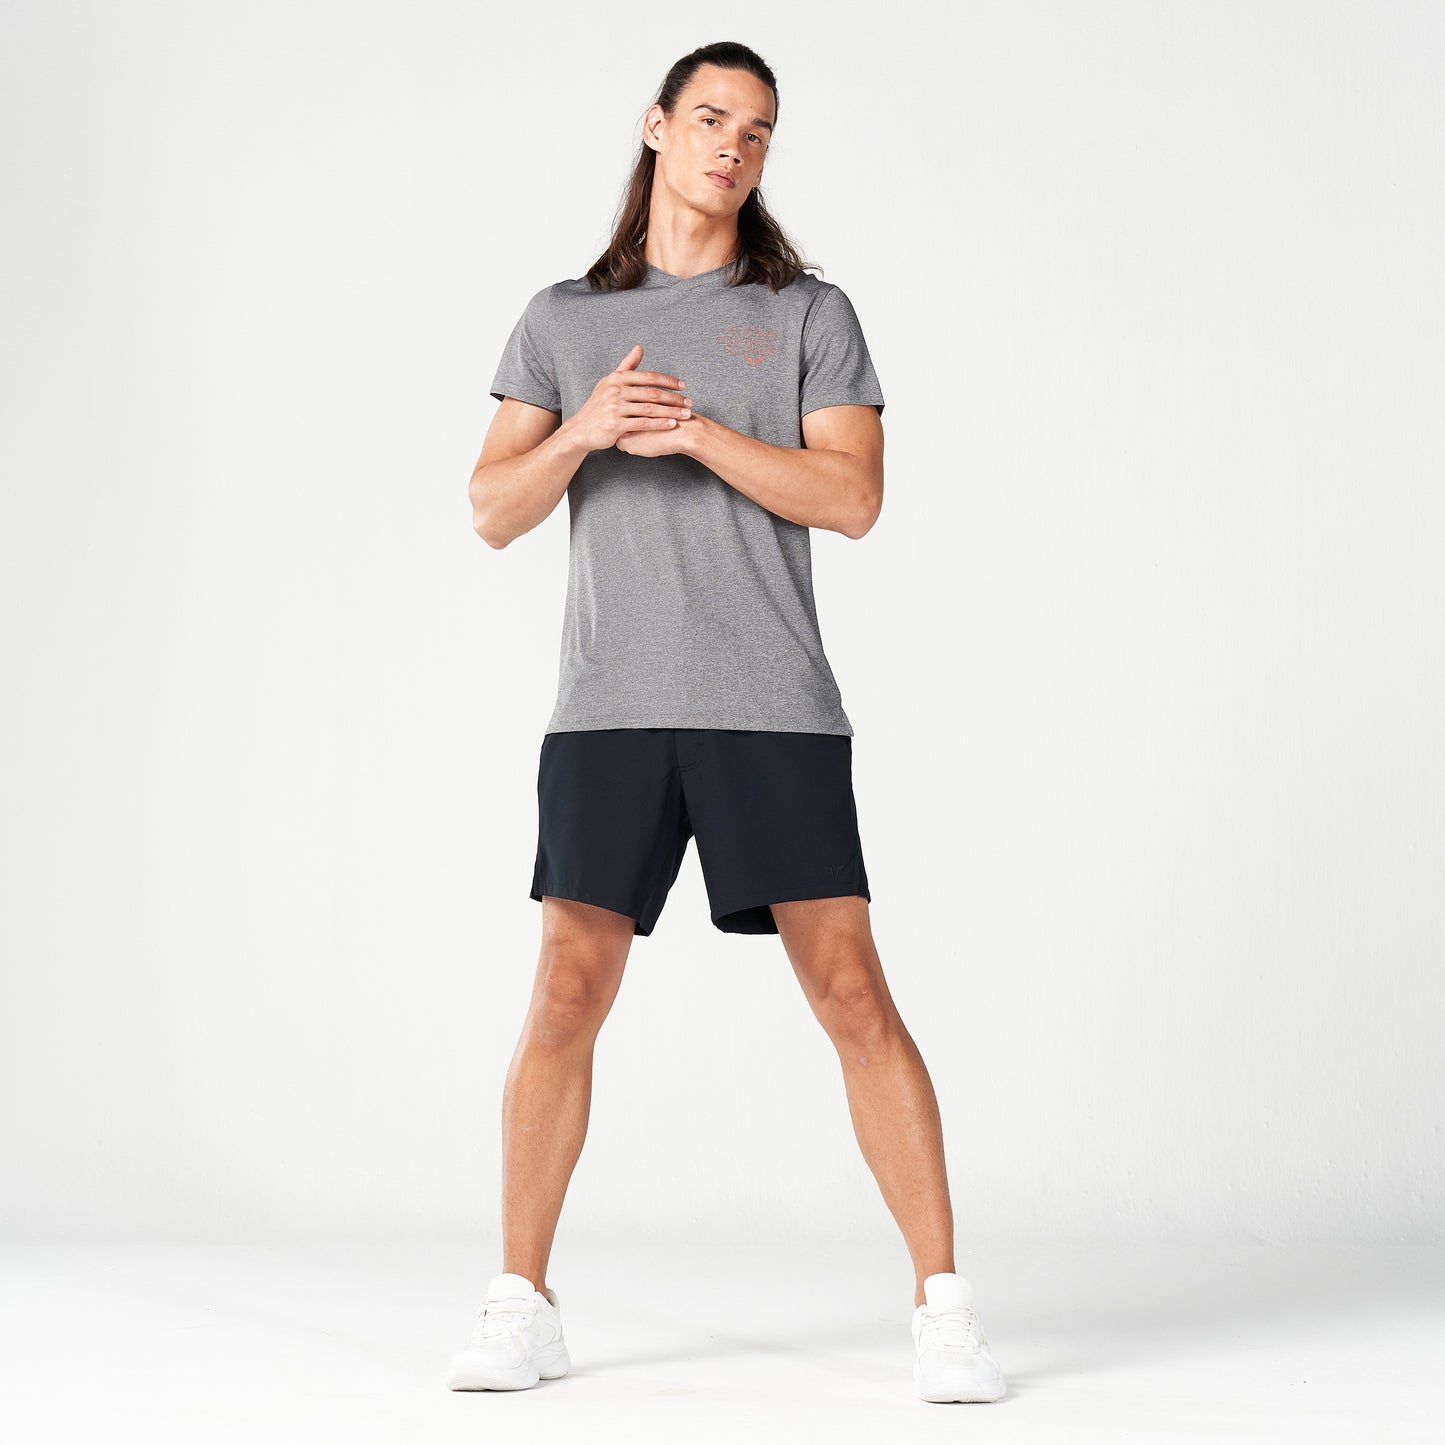 squatwolf-gym-wear-code-v-neck-muscle-tee-grey-marl-workout-shirts-for-men